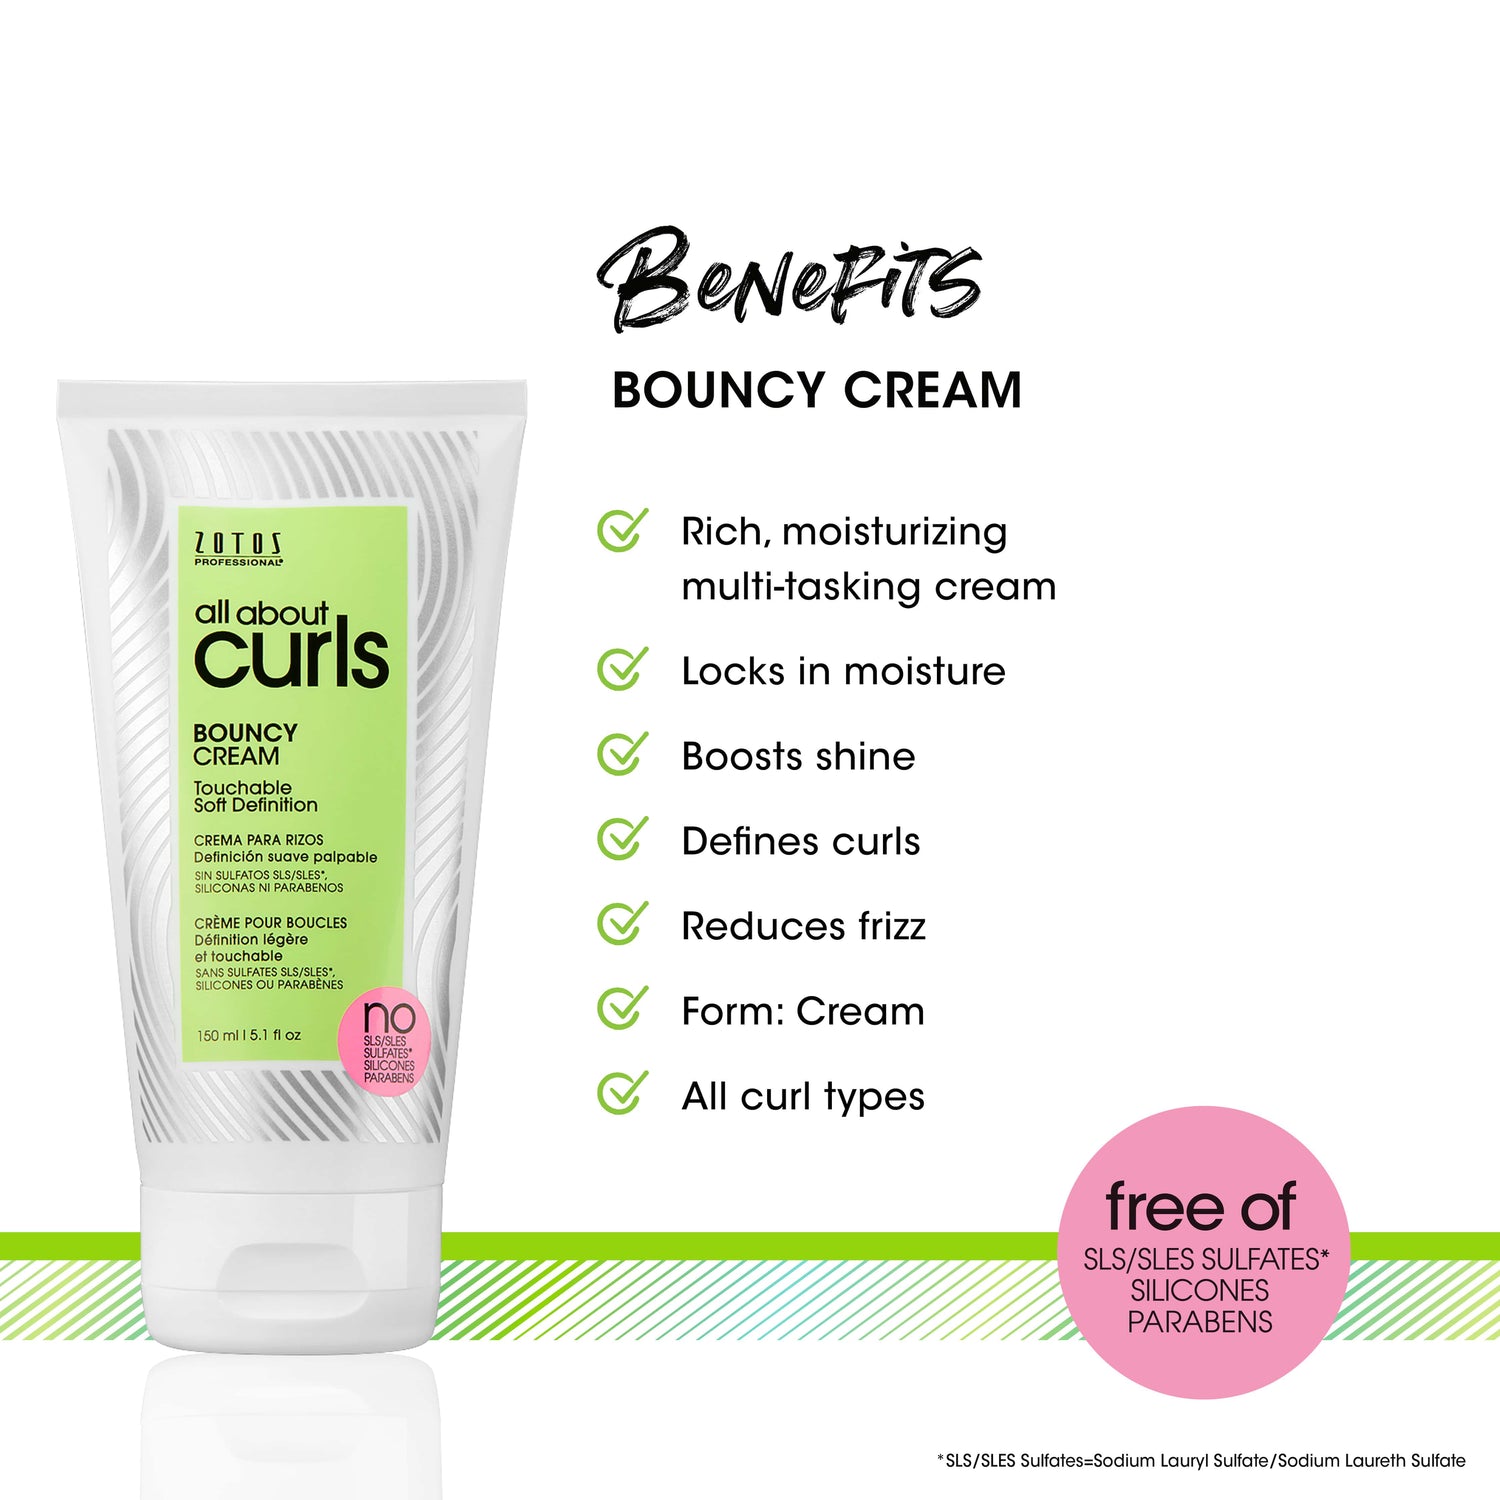 All About Curls® Bouncy Cream